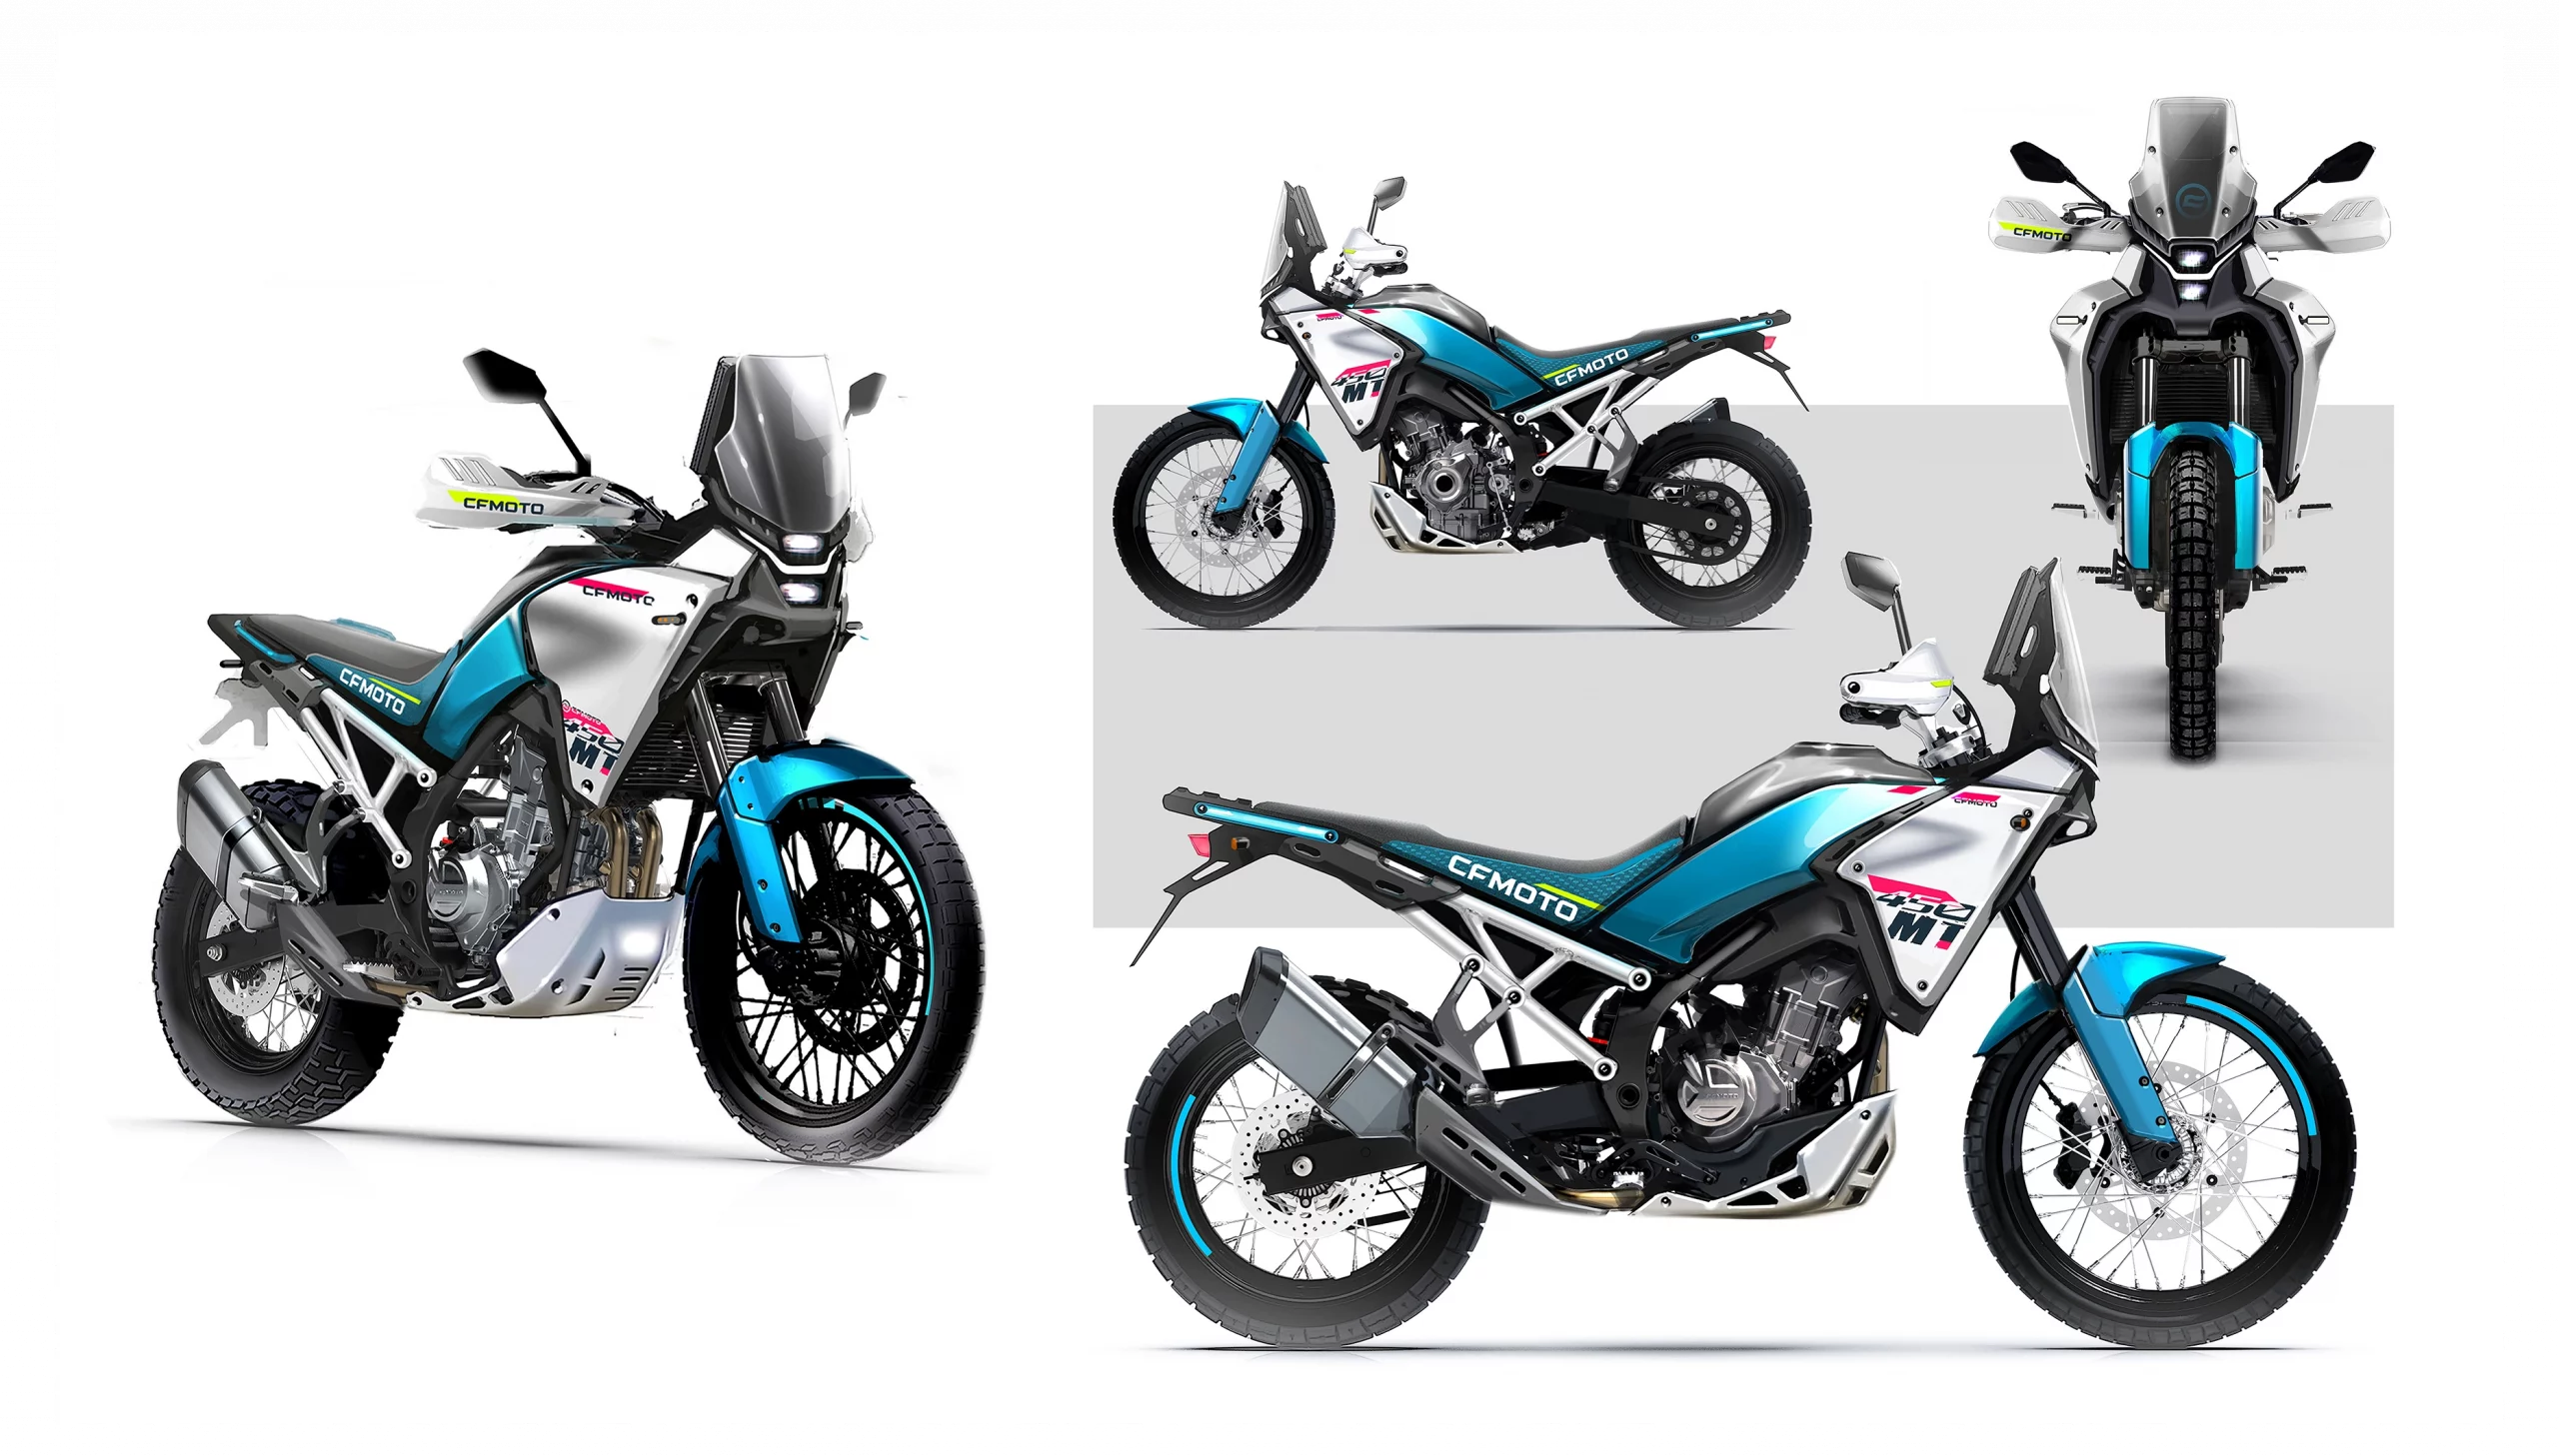 3_CFMOTO_450_MT_offroad_touring_motorcycle_sketches_renders_by_KISKA_Landscape